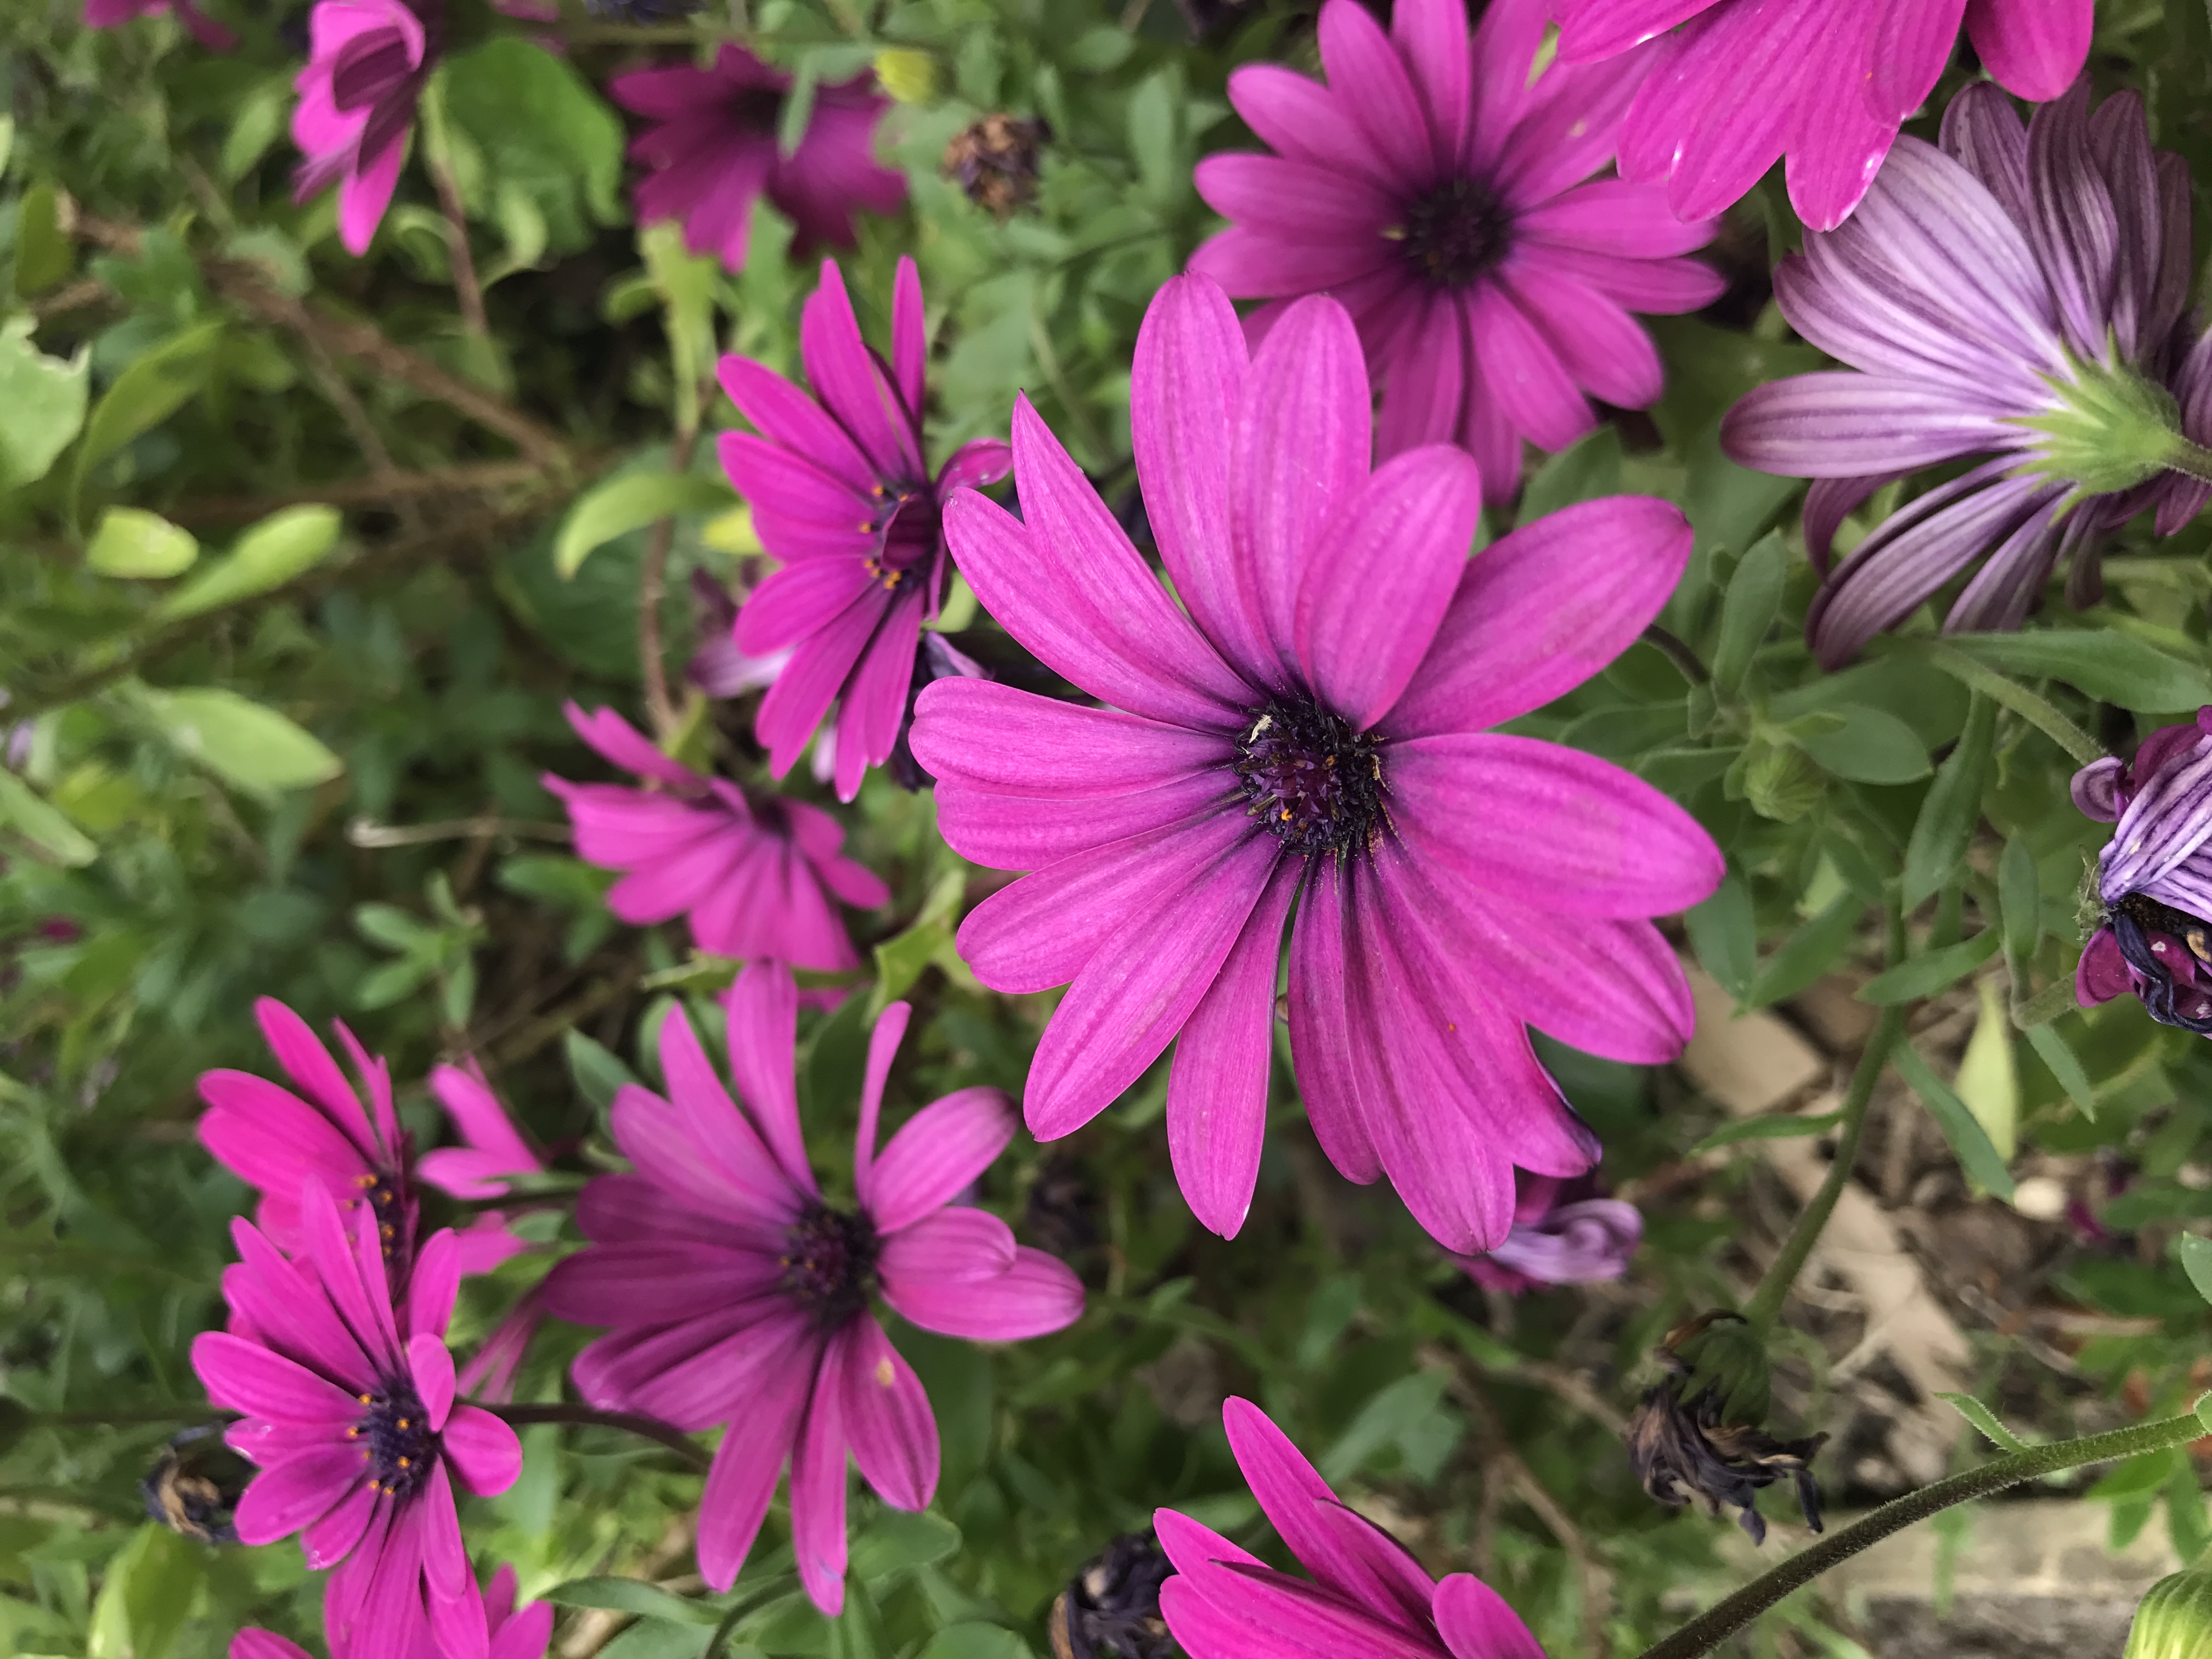  Picture of a Purple Daisy flower